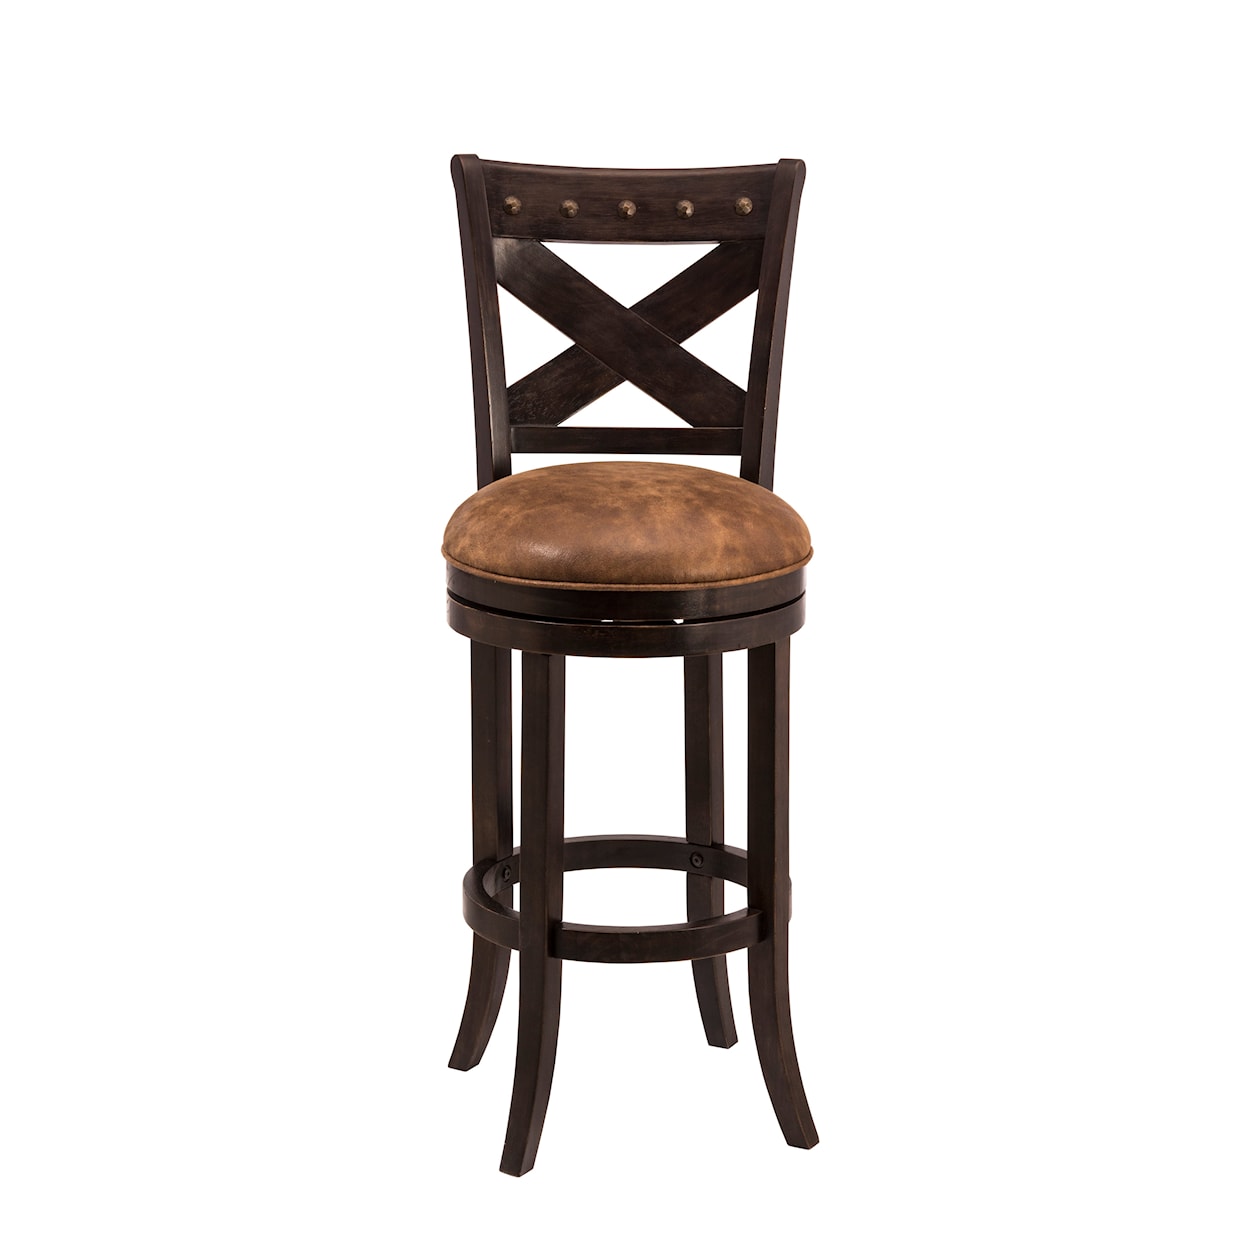 Hillsdale Brantley Counter Stool